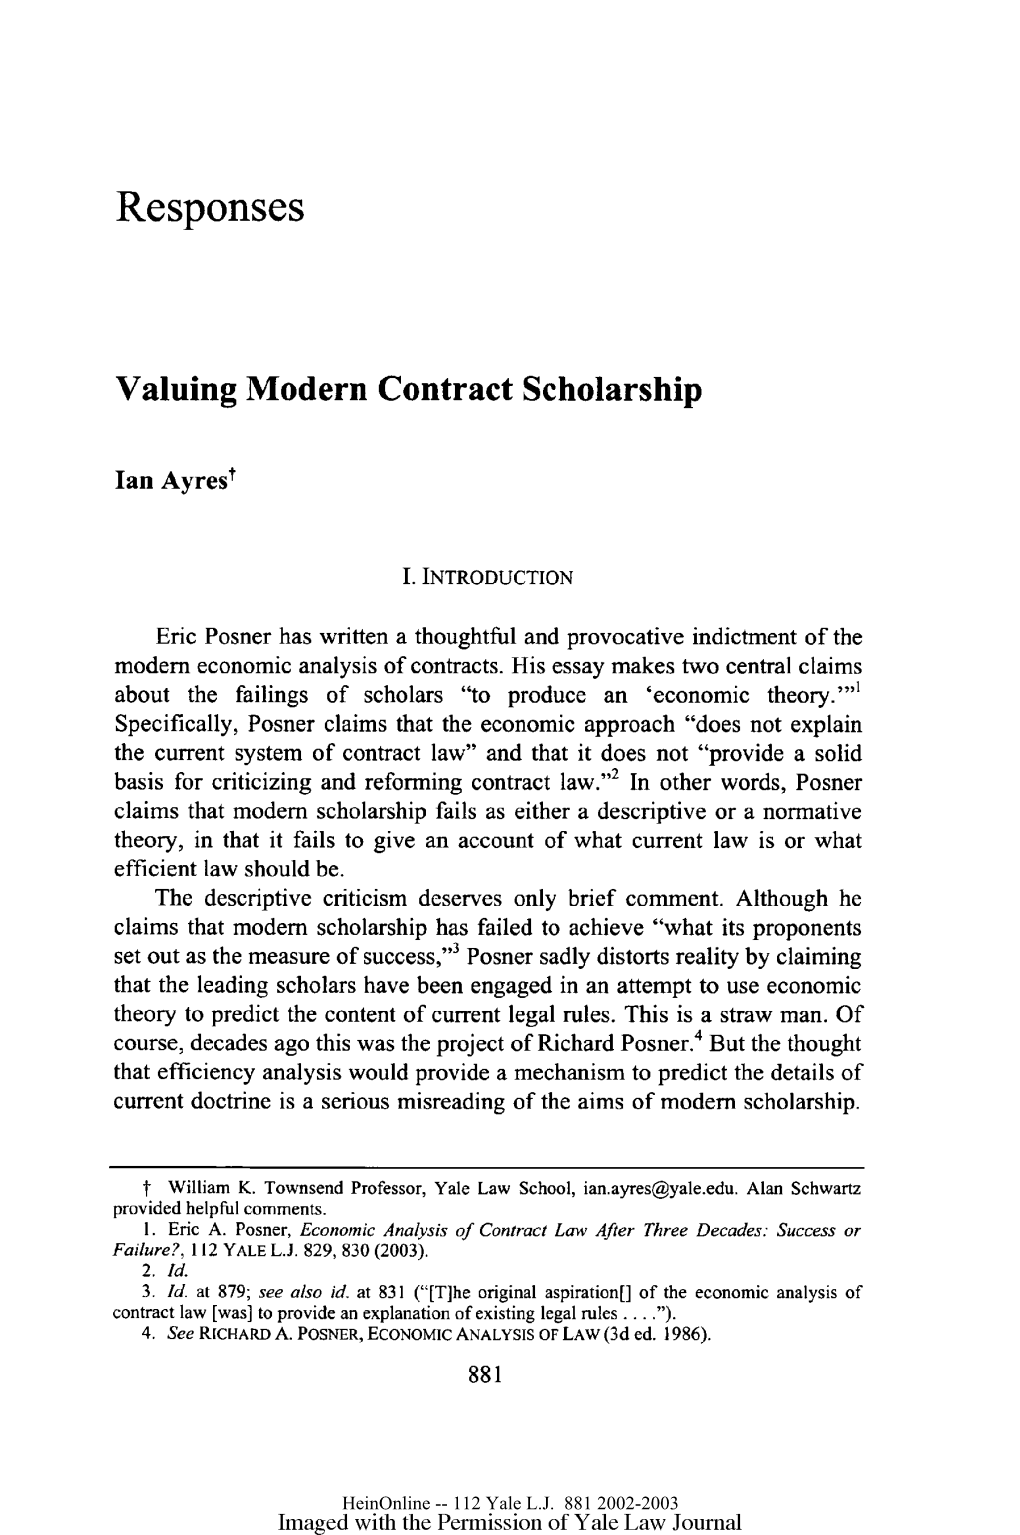 Valuing Modern Contract Scholarship